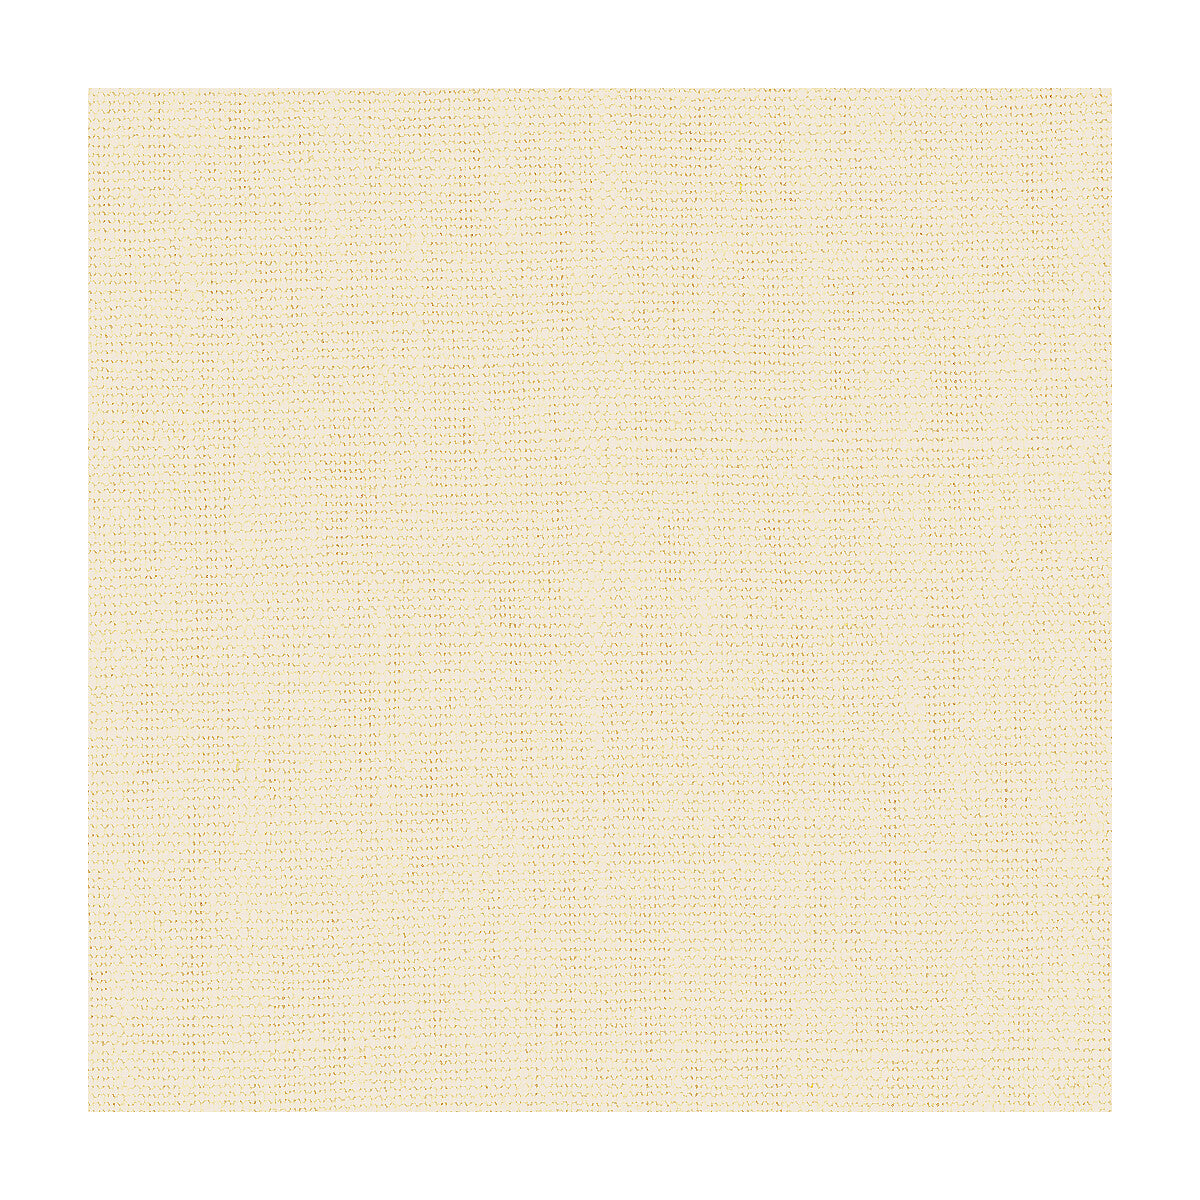 Kravet Basics fabric in 33771-1001 color - pattern 33771.1001.0 - by Kravet Basics in the Perfect Plains collection